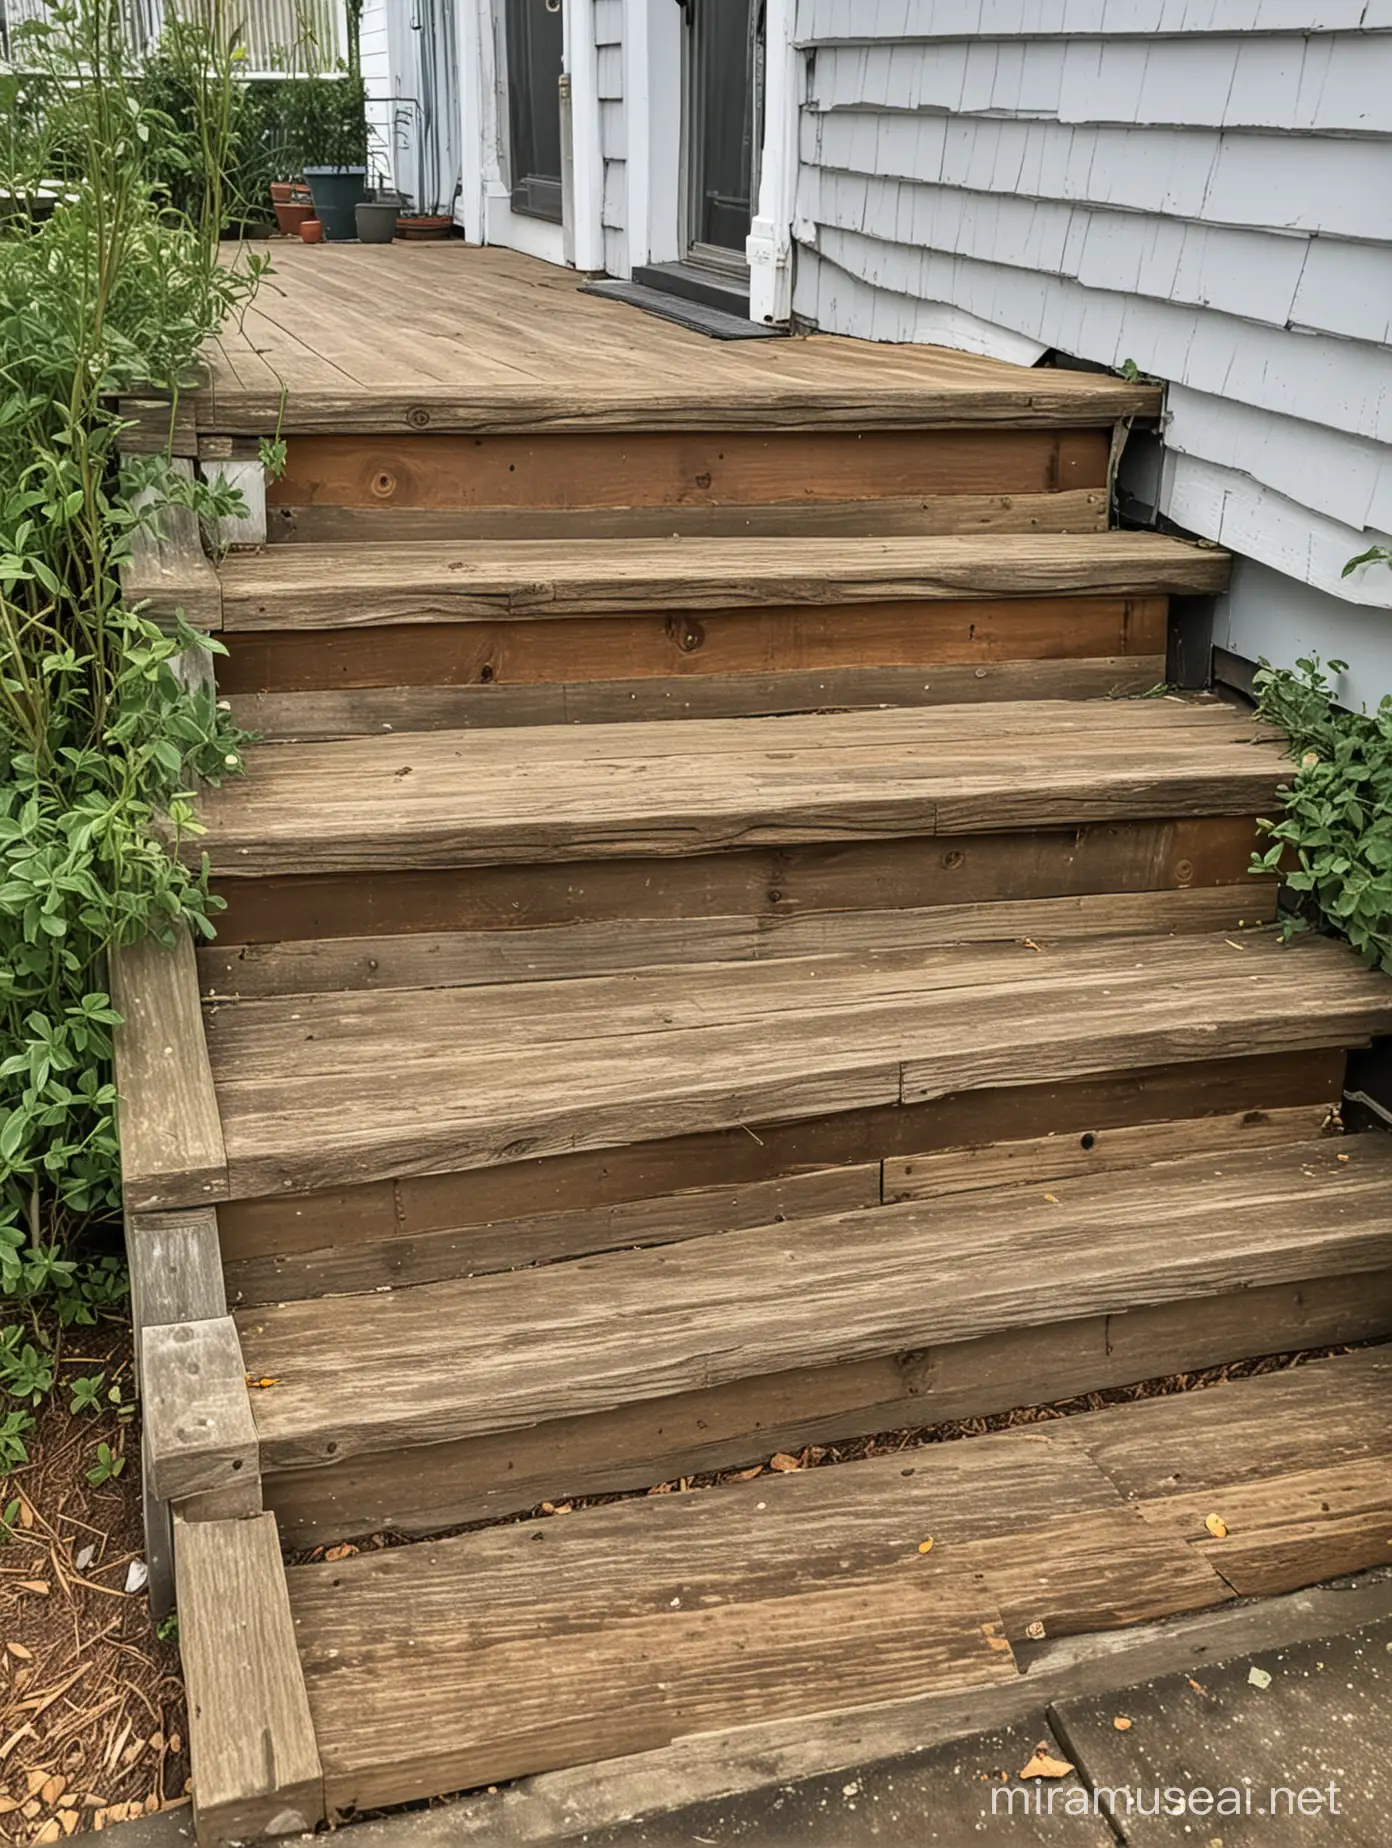 Rustic Wooden Porch Steps Nearby